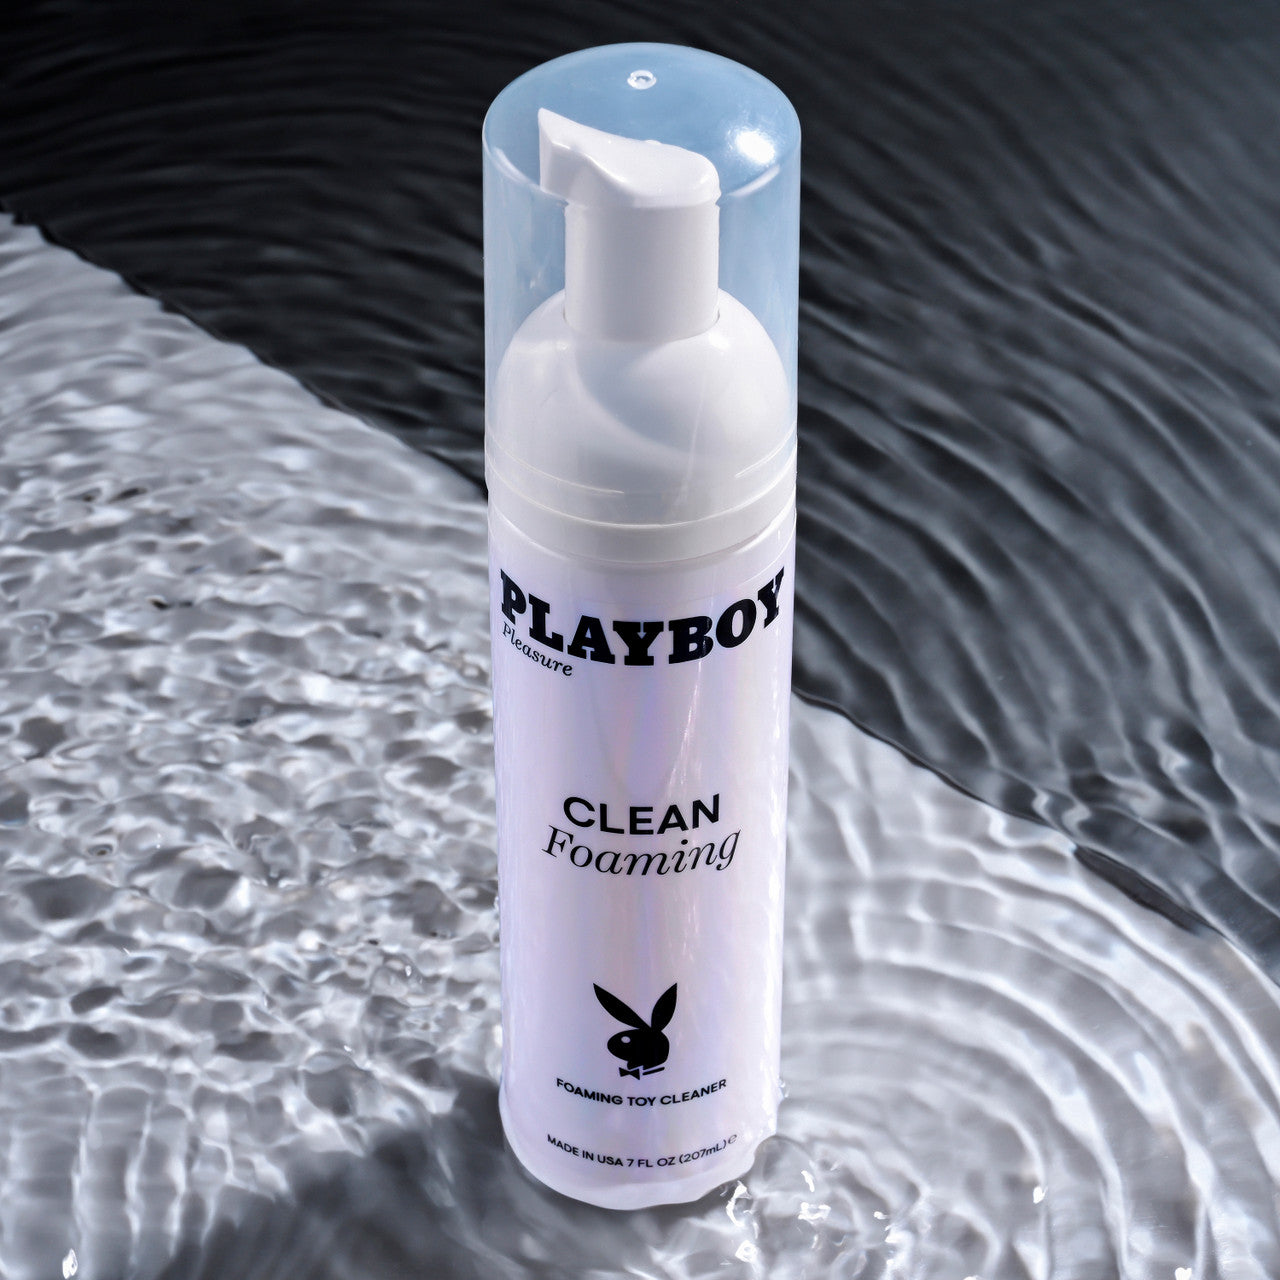 Playboy Clean Foaming Toy Cleaner 7 oz.